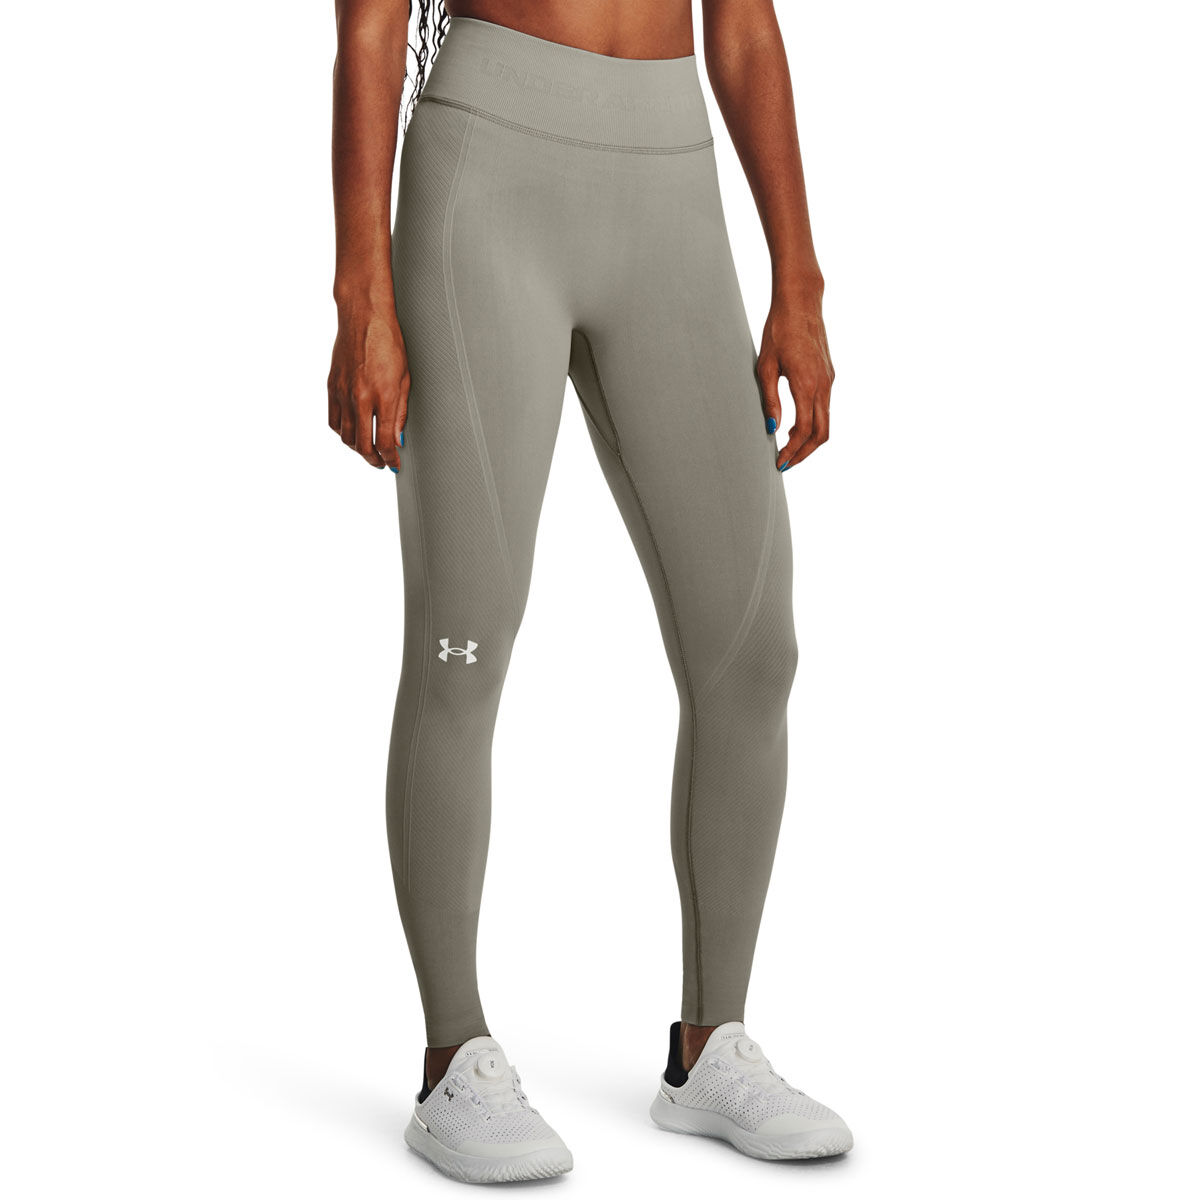 Under Armour Womens Train Seamless Full Length Tights, Green, rebel_hi-res